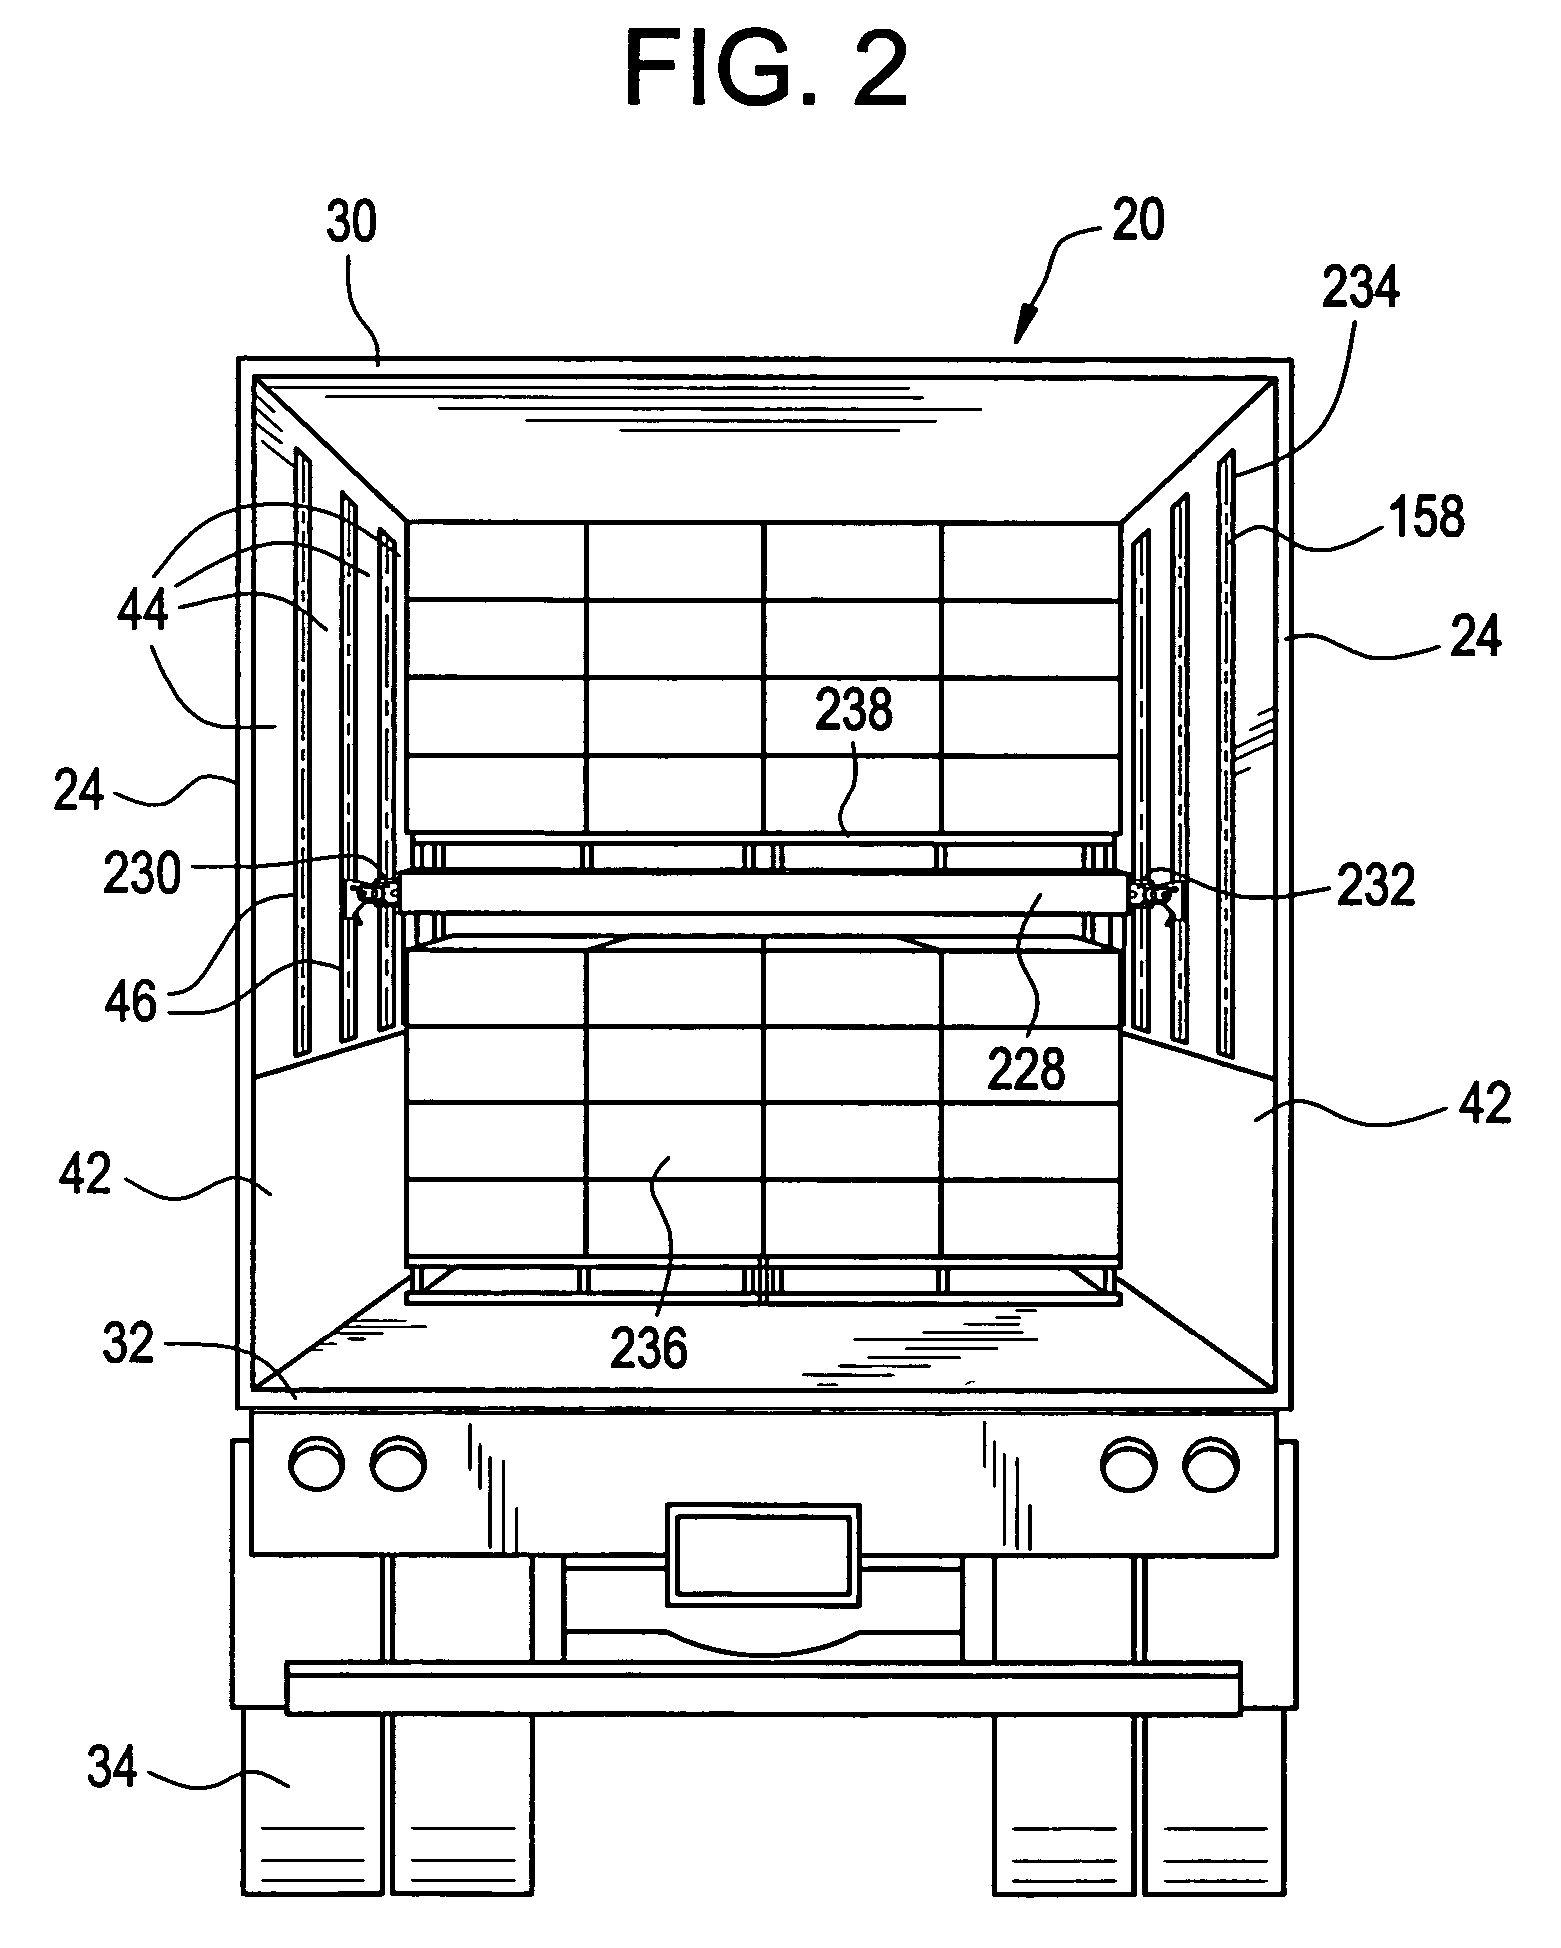 Integrated anchoring system and composite plate for a trailer side wall joint